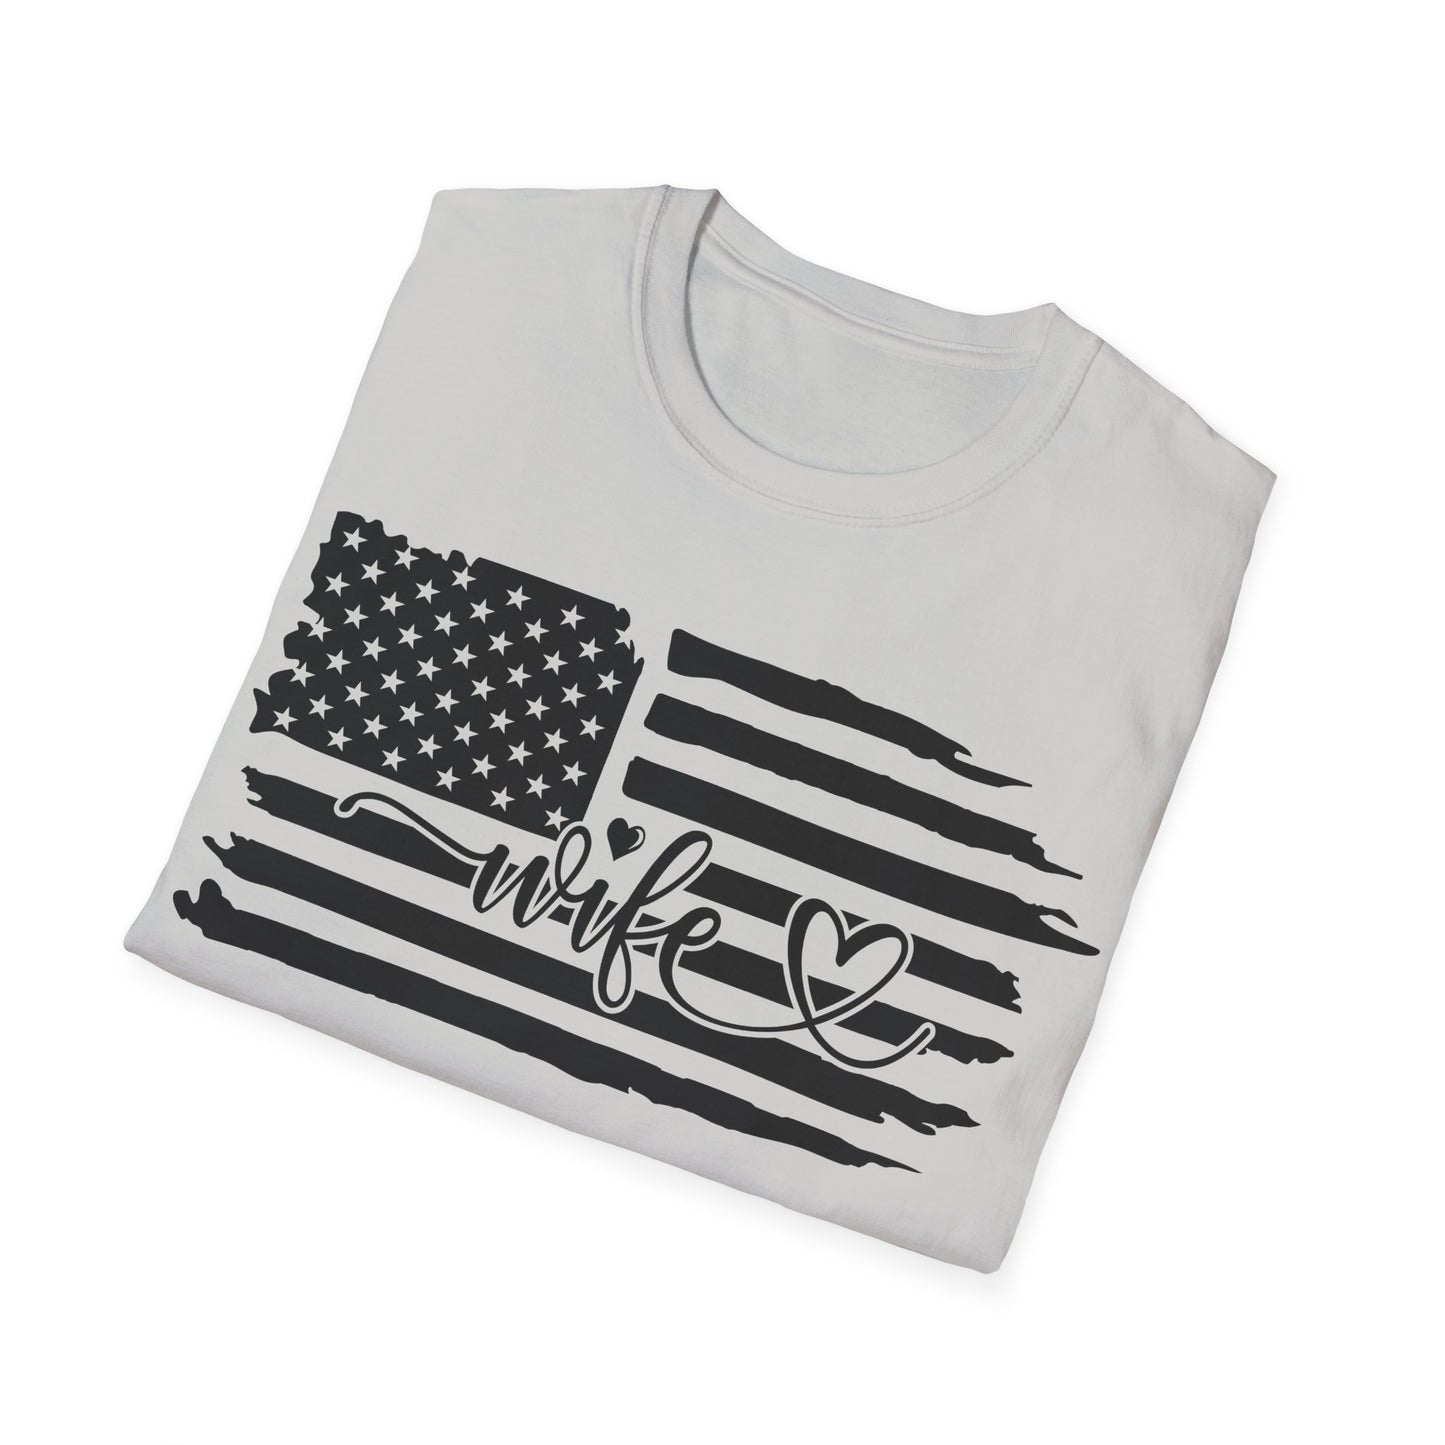 Distressed American Flag B&W - Wife - Unisex Softstyle T-Shirt